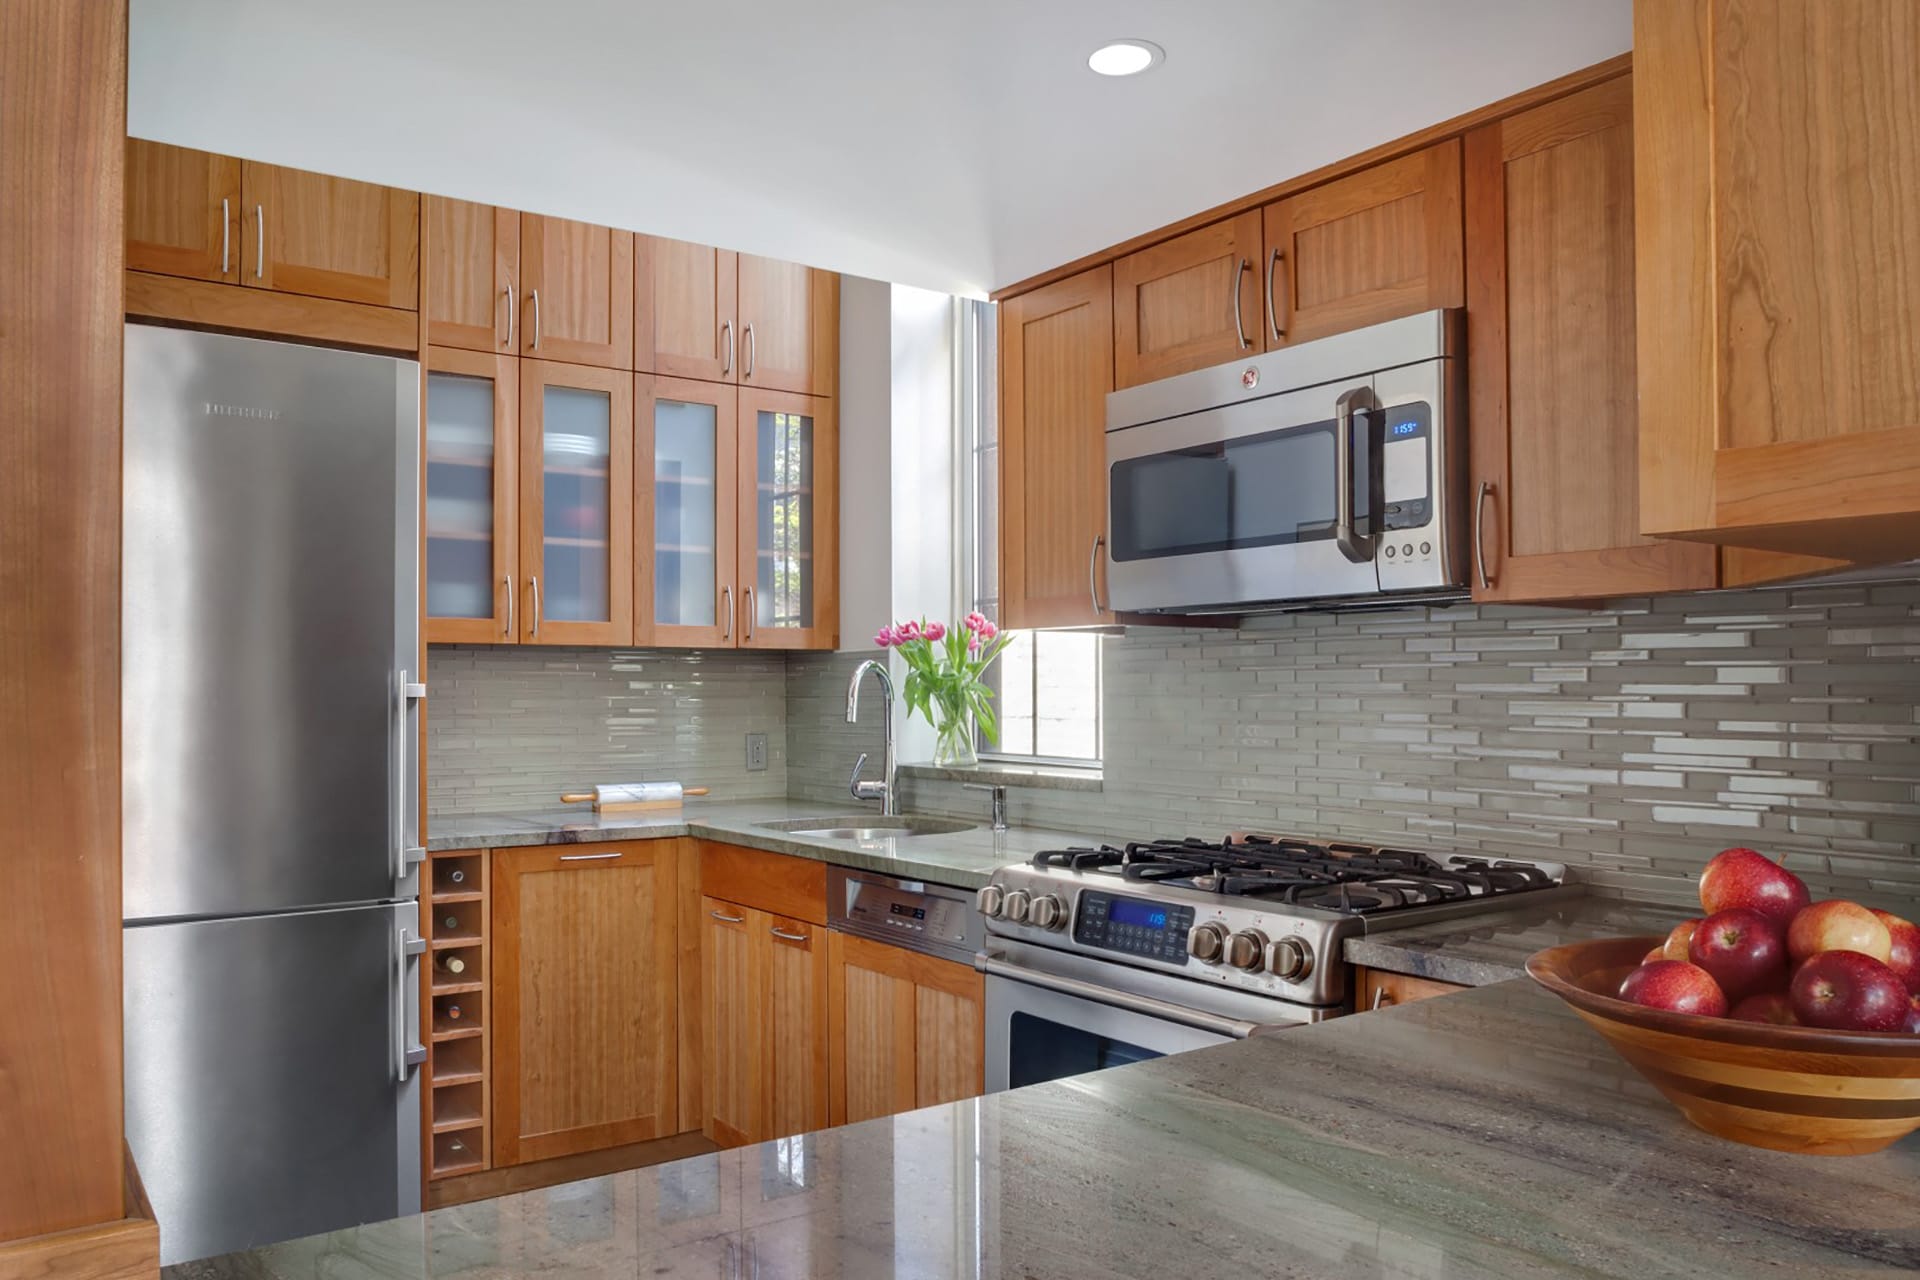 Kitchen after our renovation with natural wood cabinets, stainless steel appliances, and stone countertops.